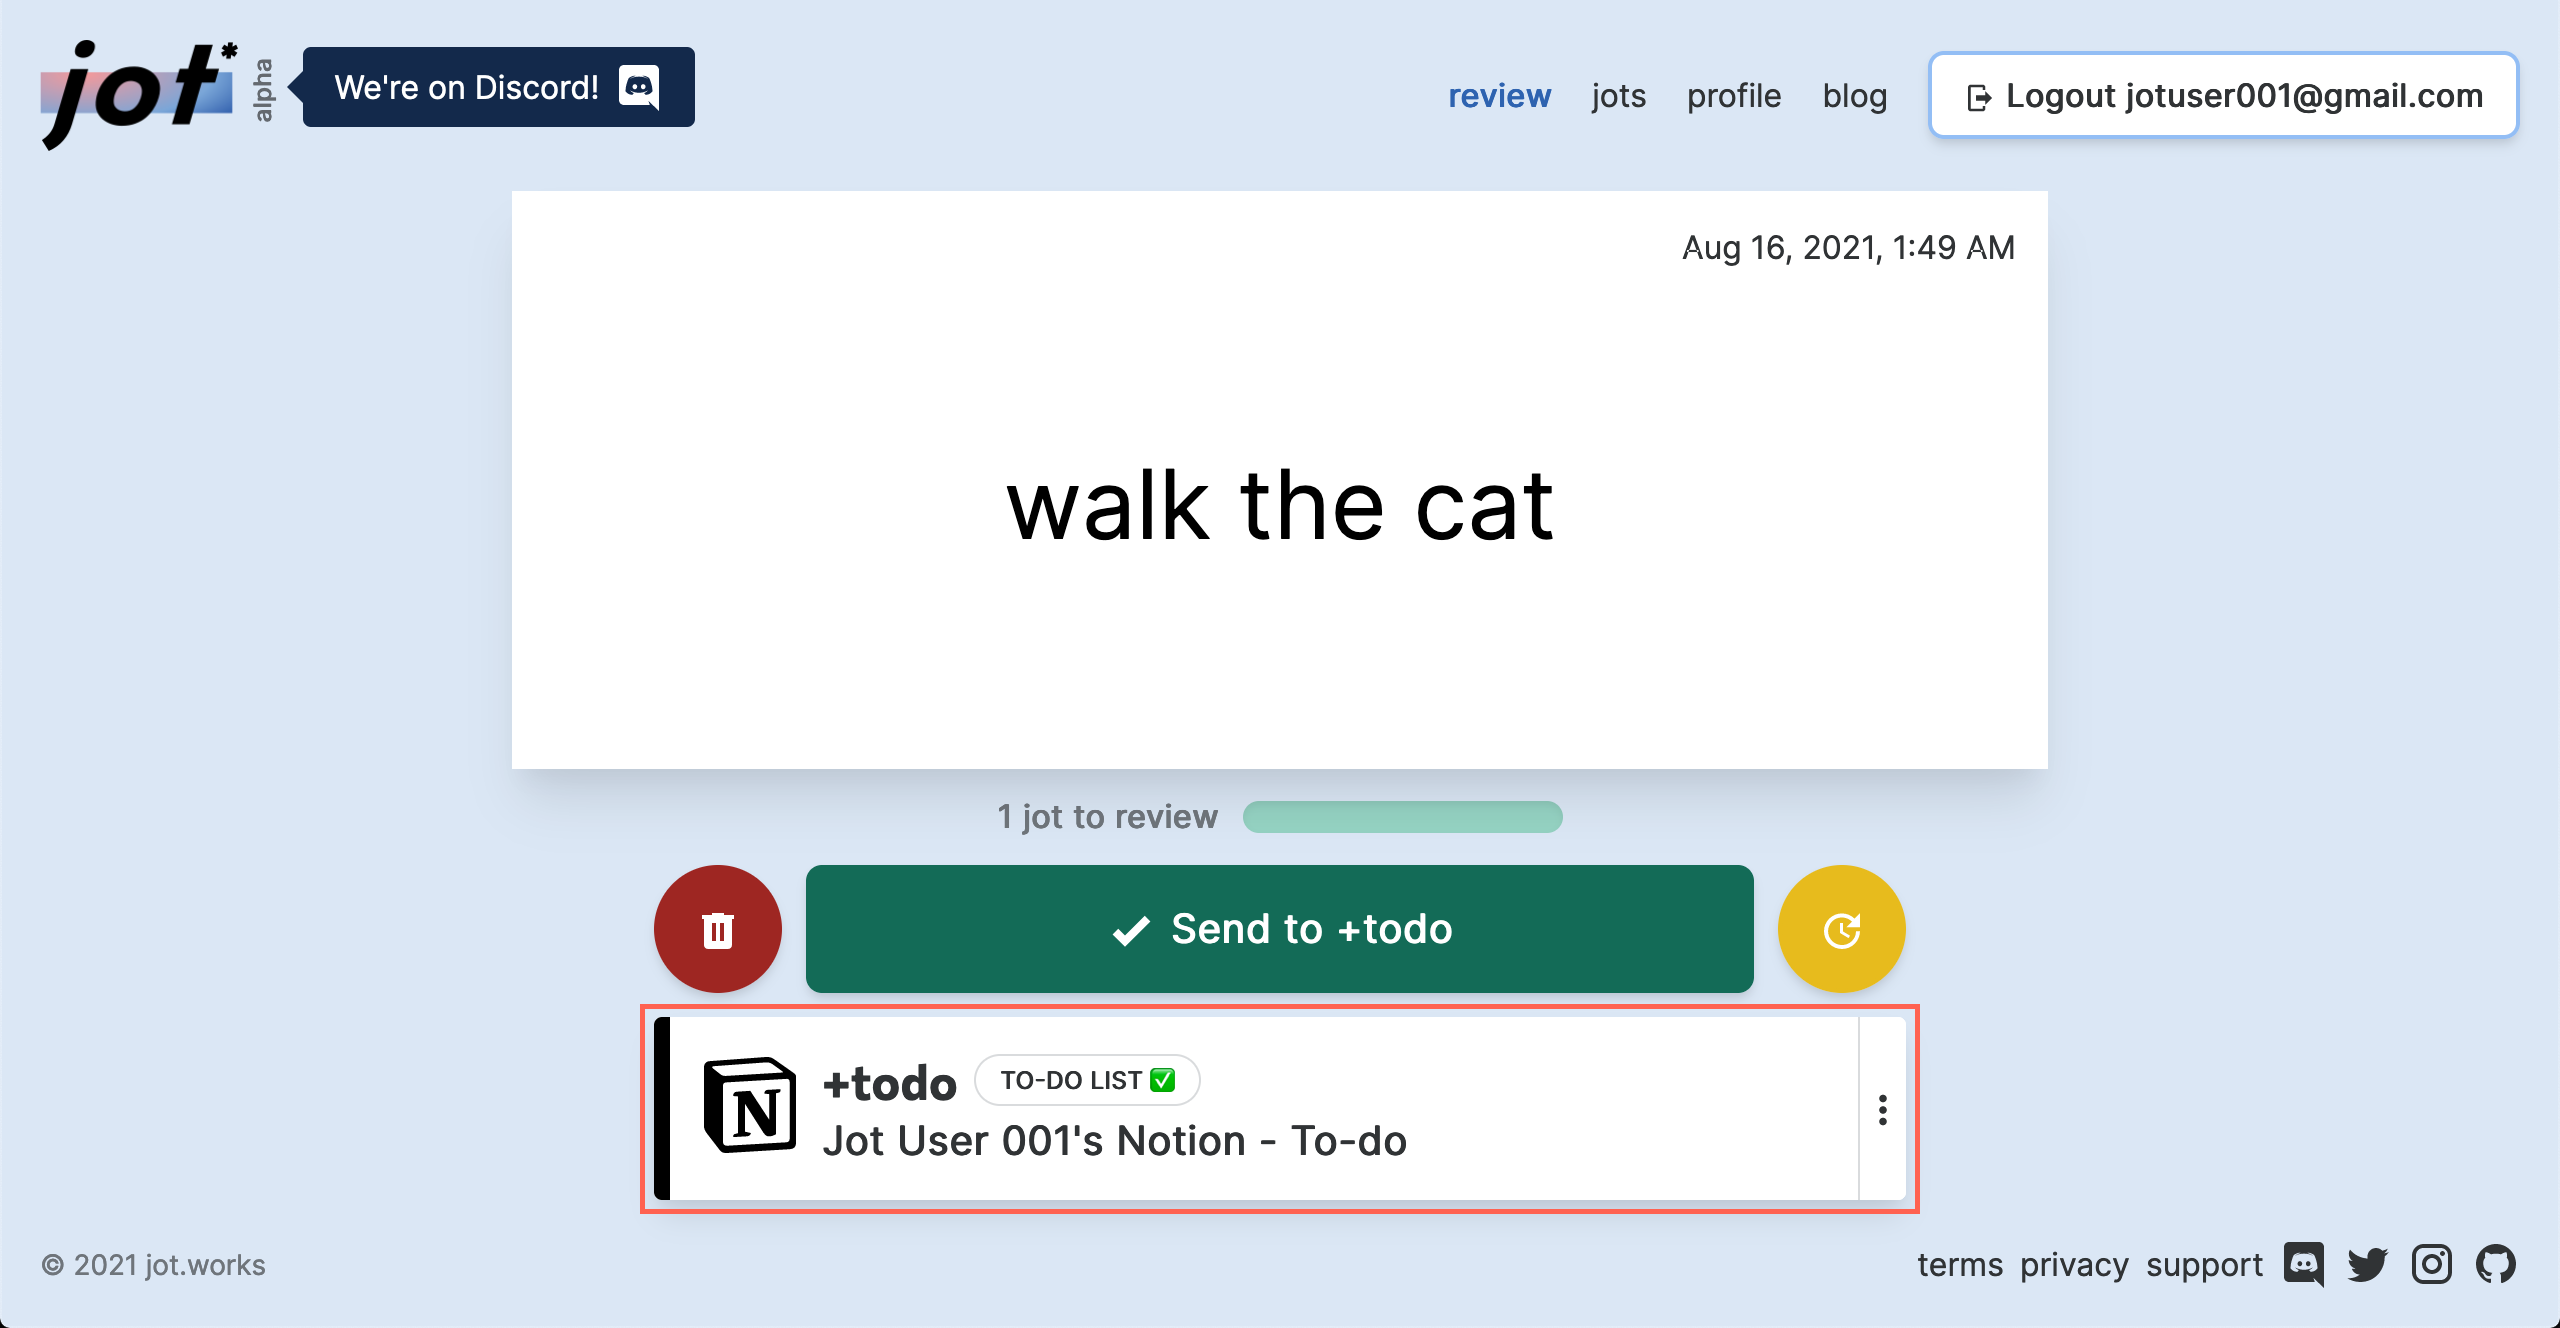 A screenshot of the review page showing our newly created "Walk the cat" jot and our+todo connection